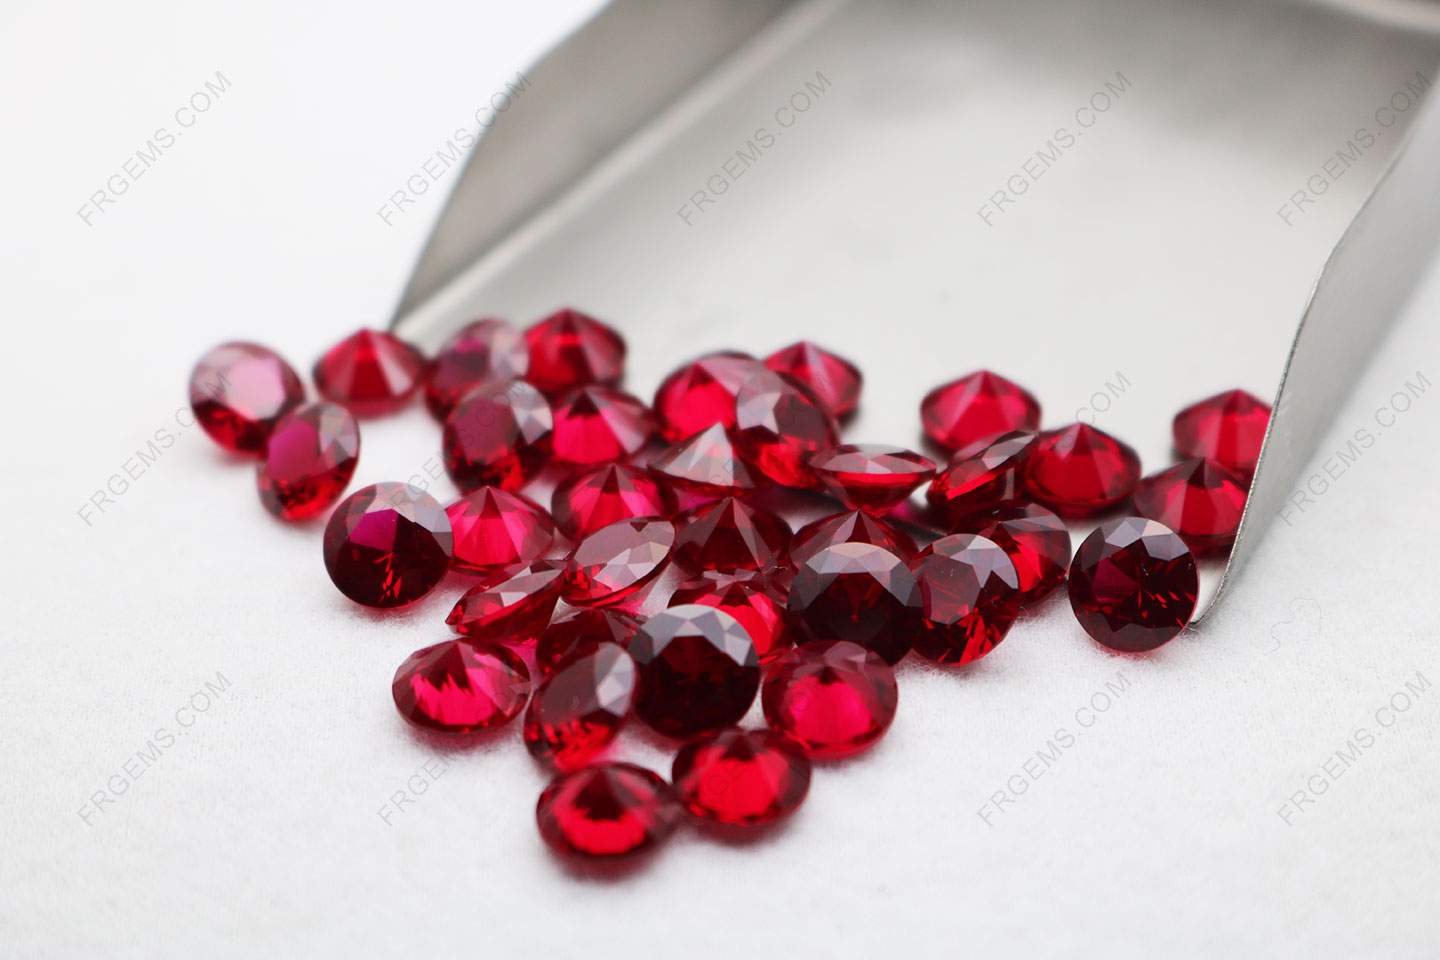 Loose Synthetic Corundum Ruby Dark Red 8# Round Faceted Cut 8.00mm 2ct weight stones wholesale